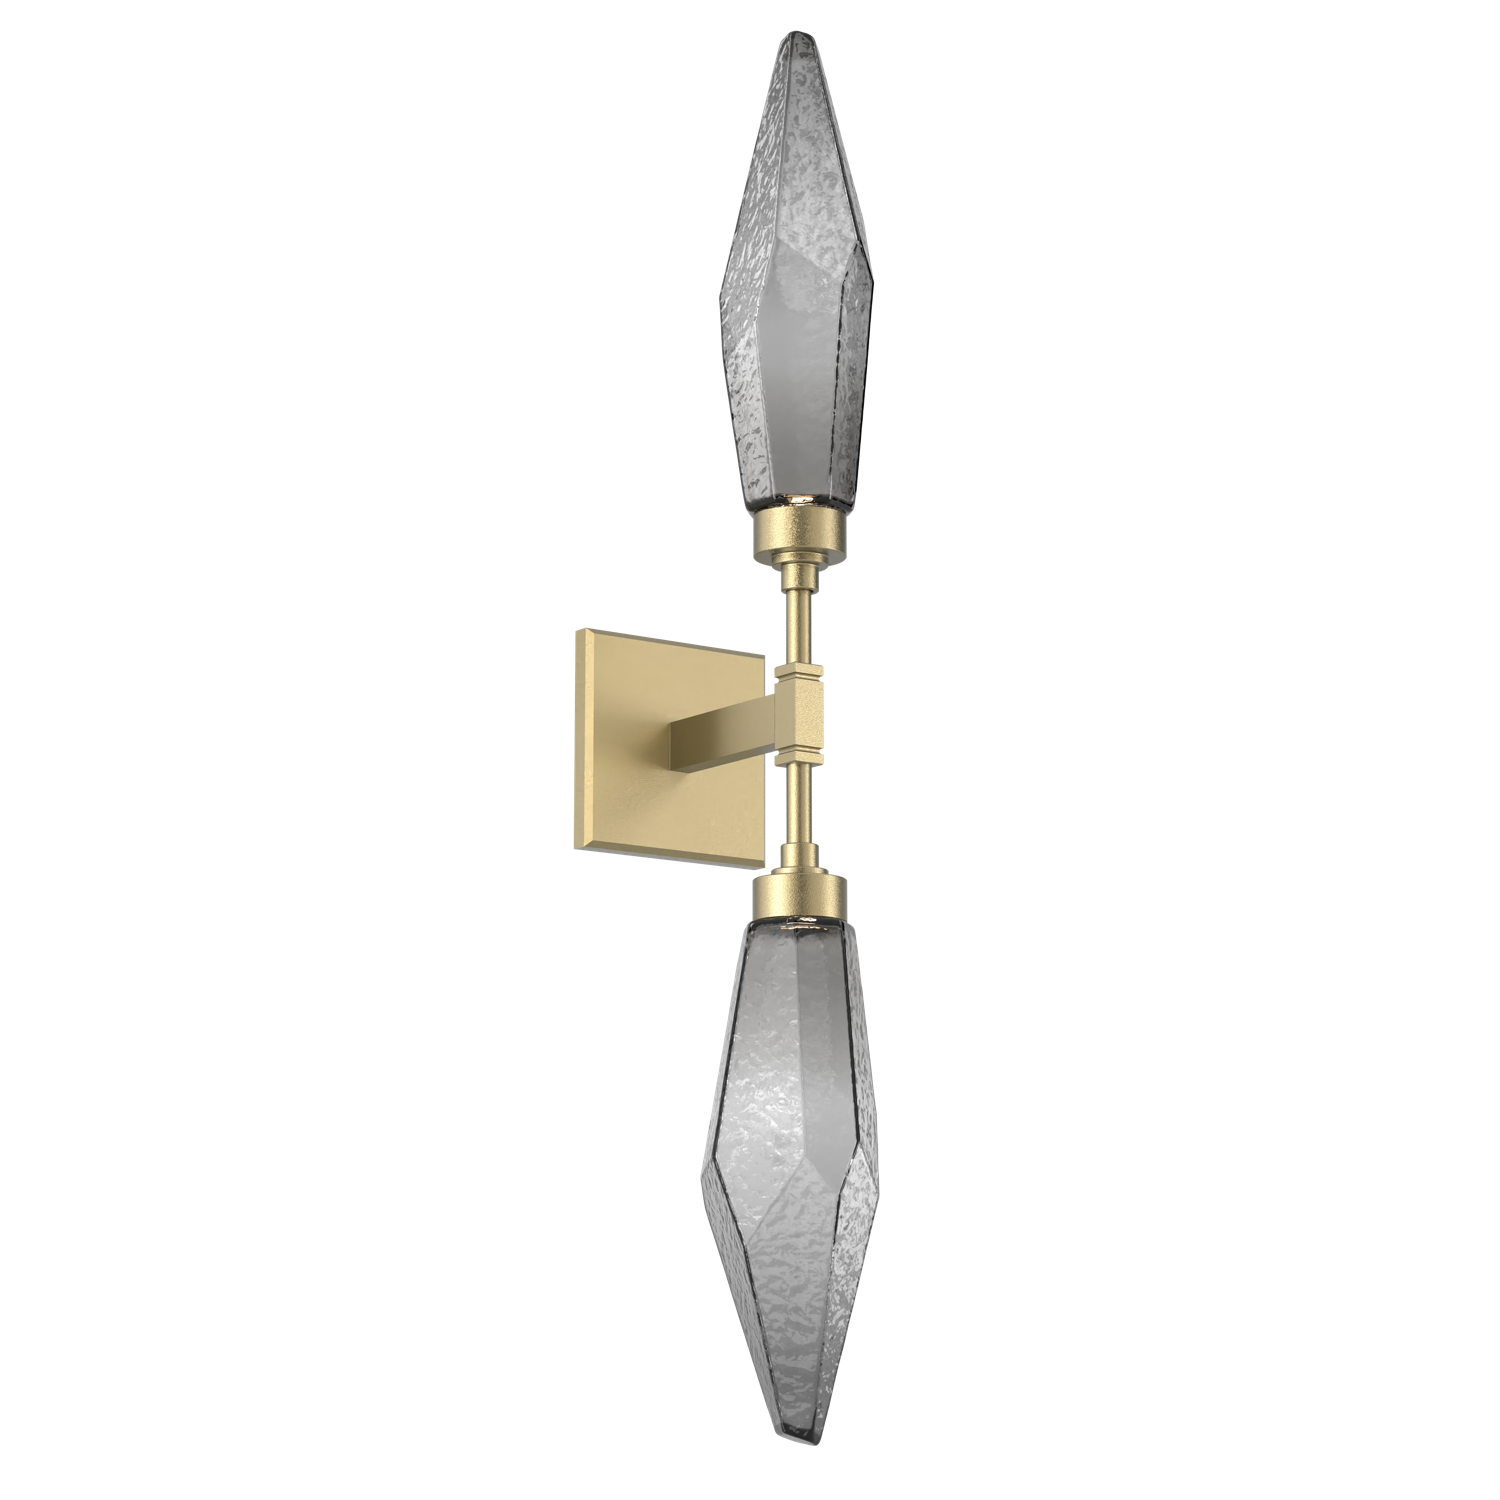 IDB0050-02-GB-CS-Hammerton-Studio-Rock-Crystal-wall-sconce-with-gilded-brass-finish-and-chilled-smoke-glass-shades-and-LED-lamping